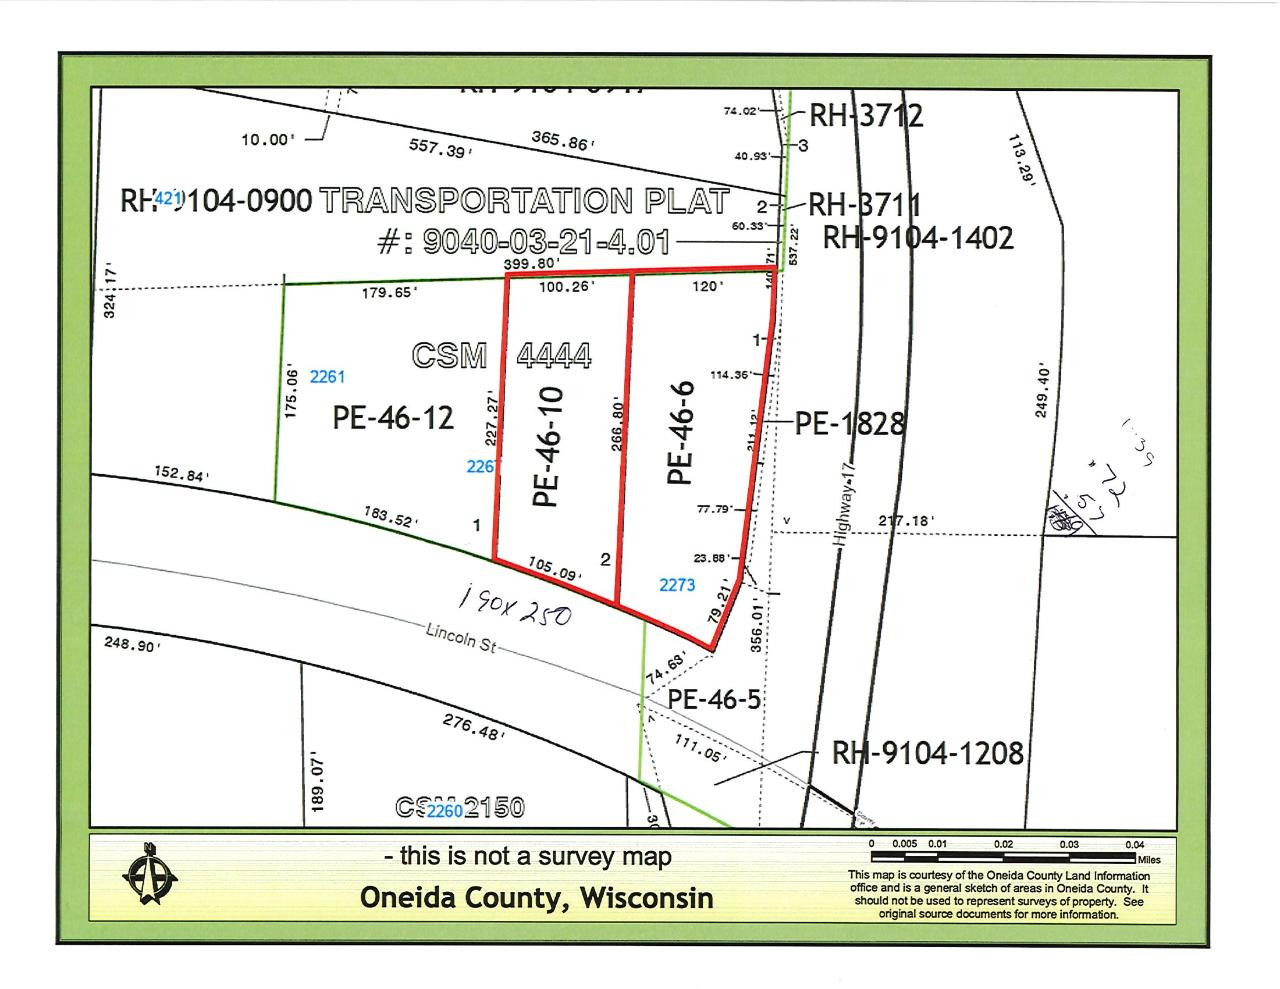 Prime corner lot location with light at intersection of State Hwy 17 and Lincoln Street in Rhinelander. Your Future business could go here on these 2 parcels with combined acreage of 1.29 acres. This parcel is zoned general use with 190 feet of frontage on Lincoln St and 250 feet on Hwy 17. Easy annexation to the city for sewer and water improvements. Buyer to verify acreage and zoning.